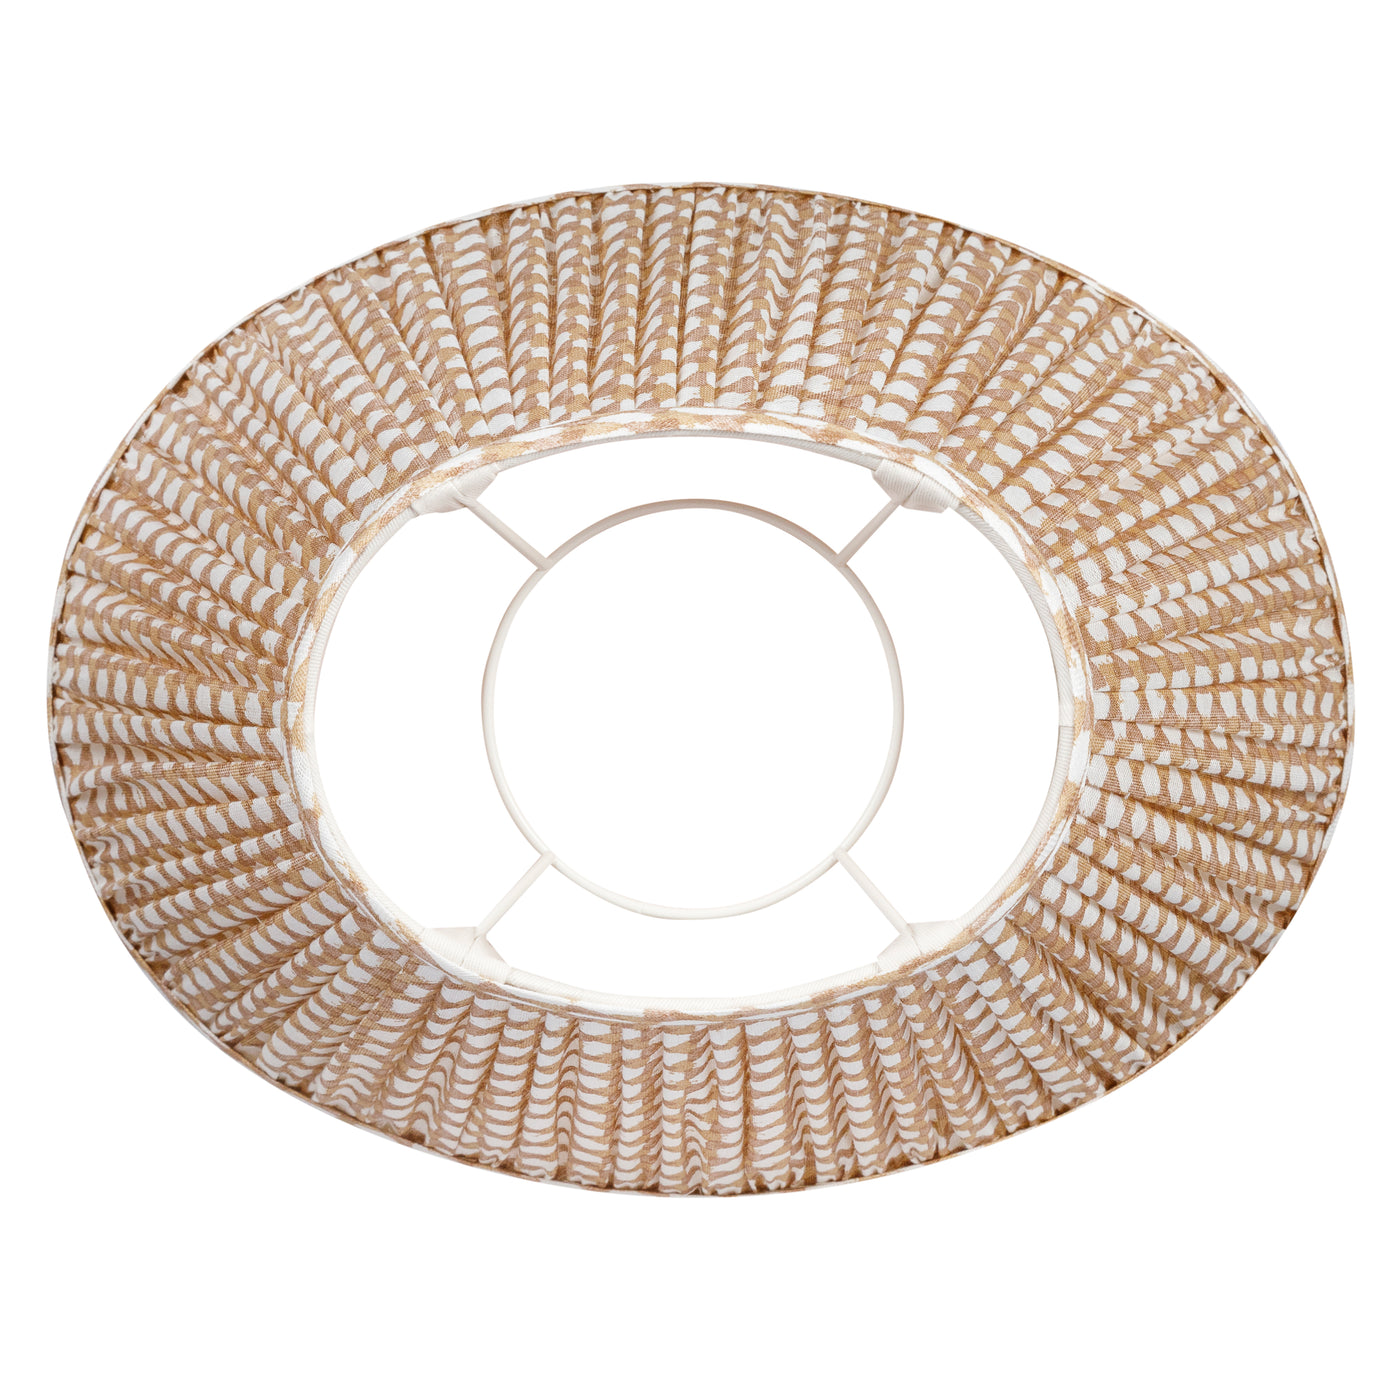 Oval Fermoie Lampshade - Wicker in Nut Brown | Newport Lamp And Shade | Located in Newport, RI